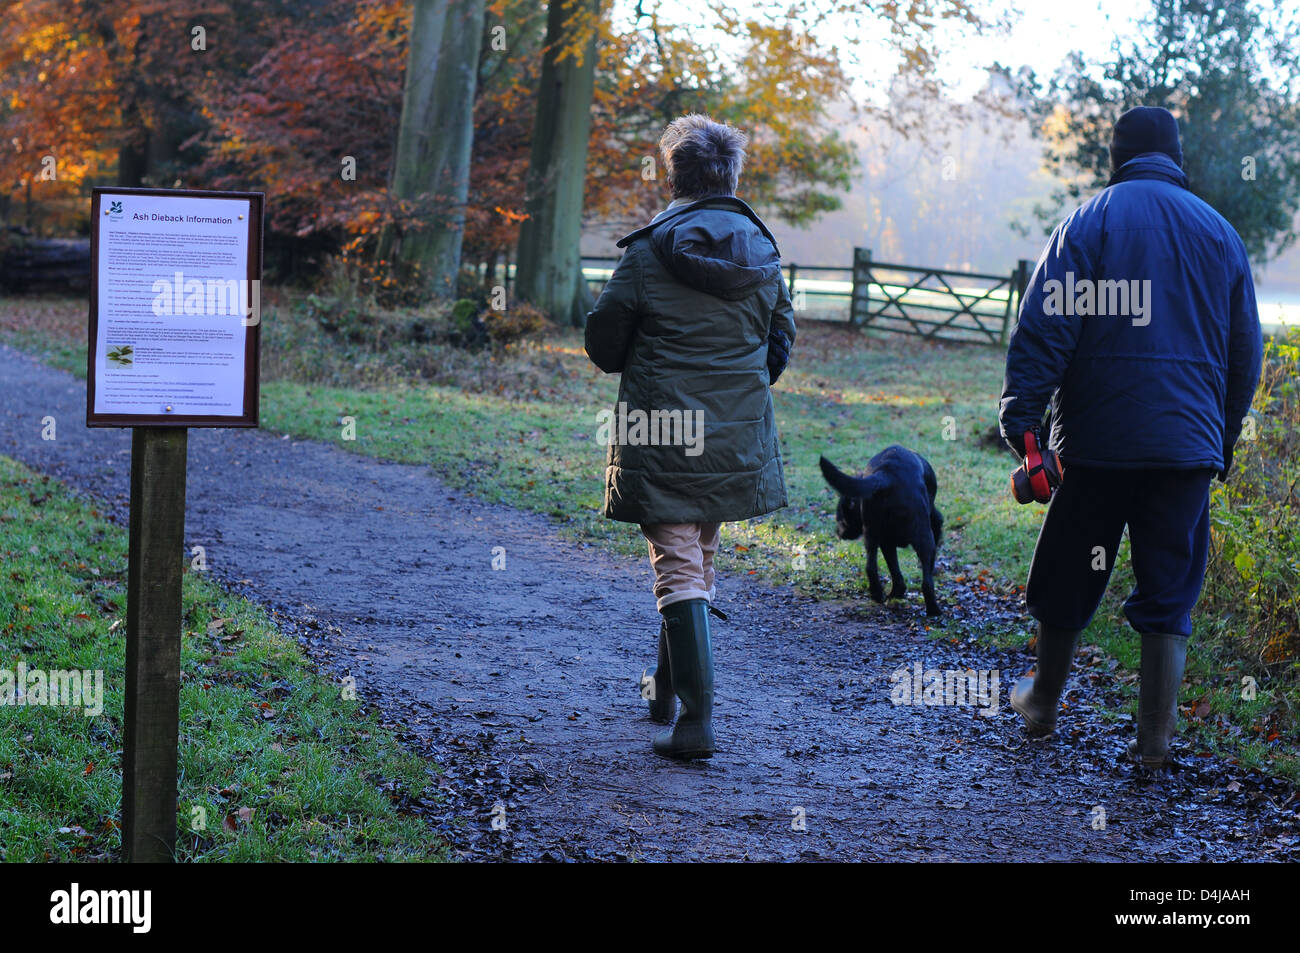 A sign in Ashridge Forest advising visitors about Ash Dieback Disease. Stock Photo